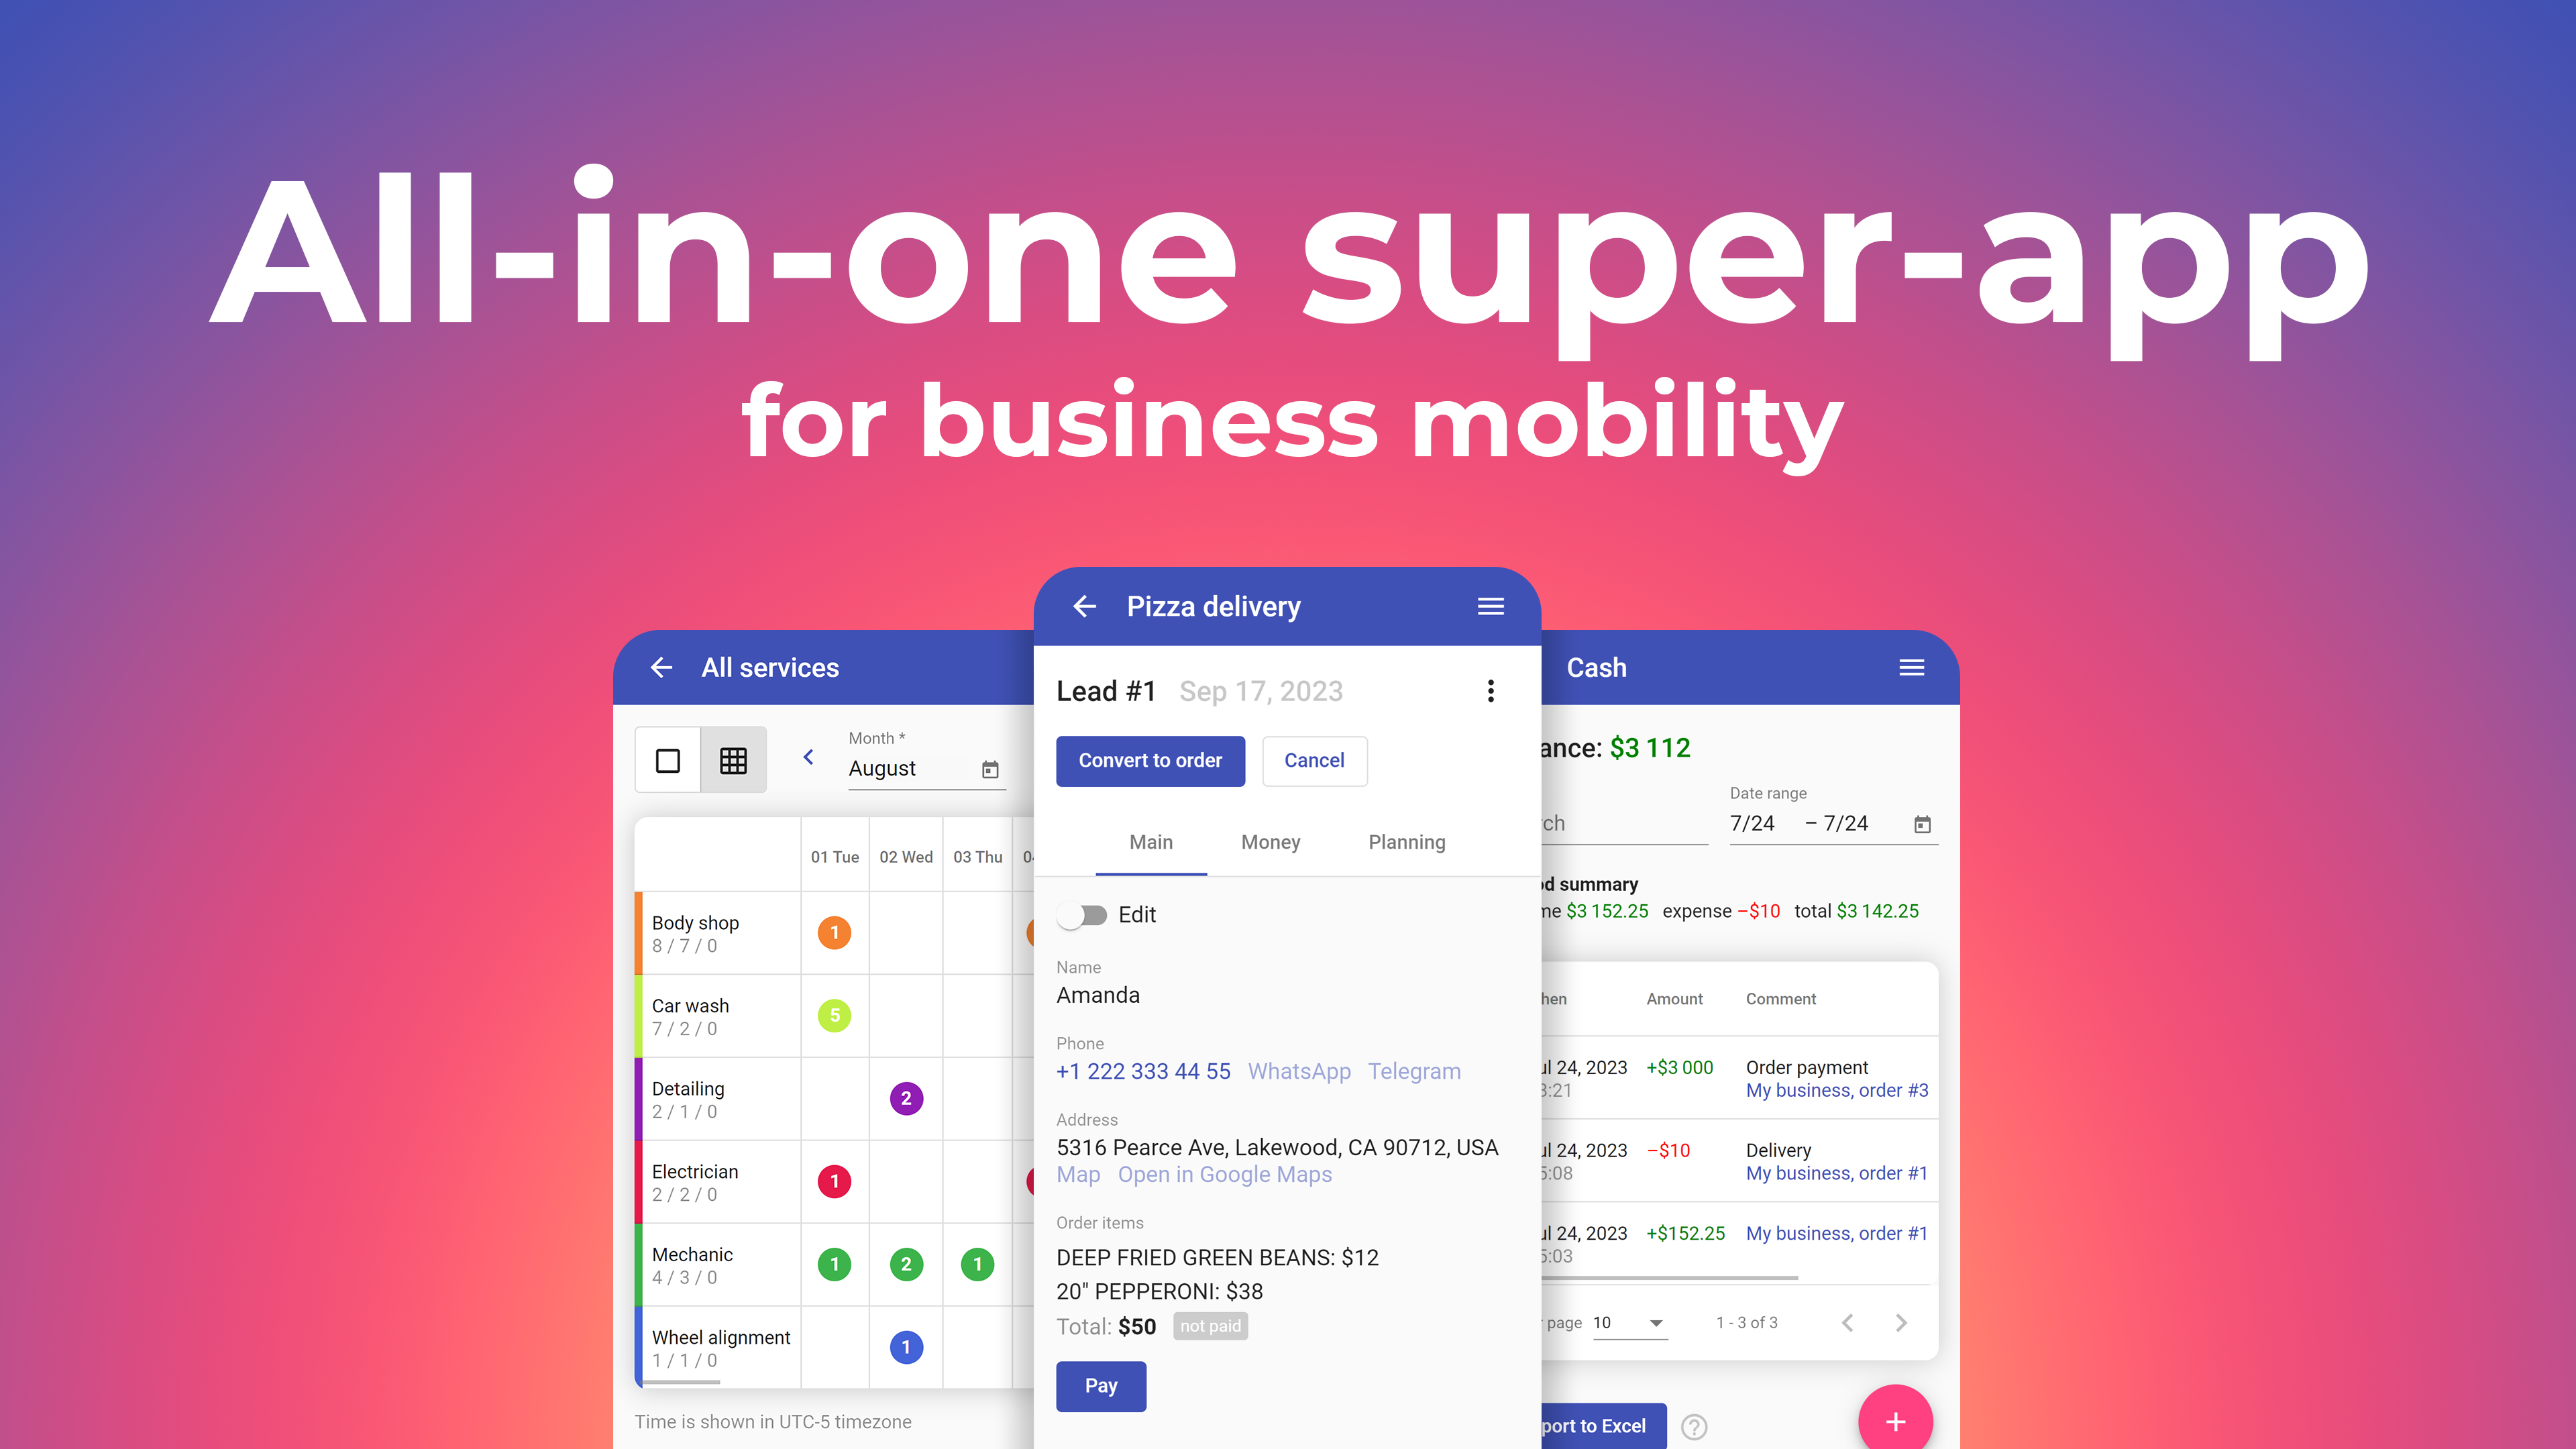 All-in-one super-app for self-employed, sole proprietors & small businesses